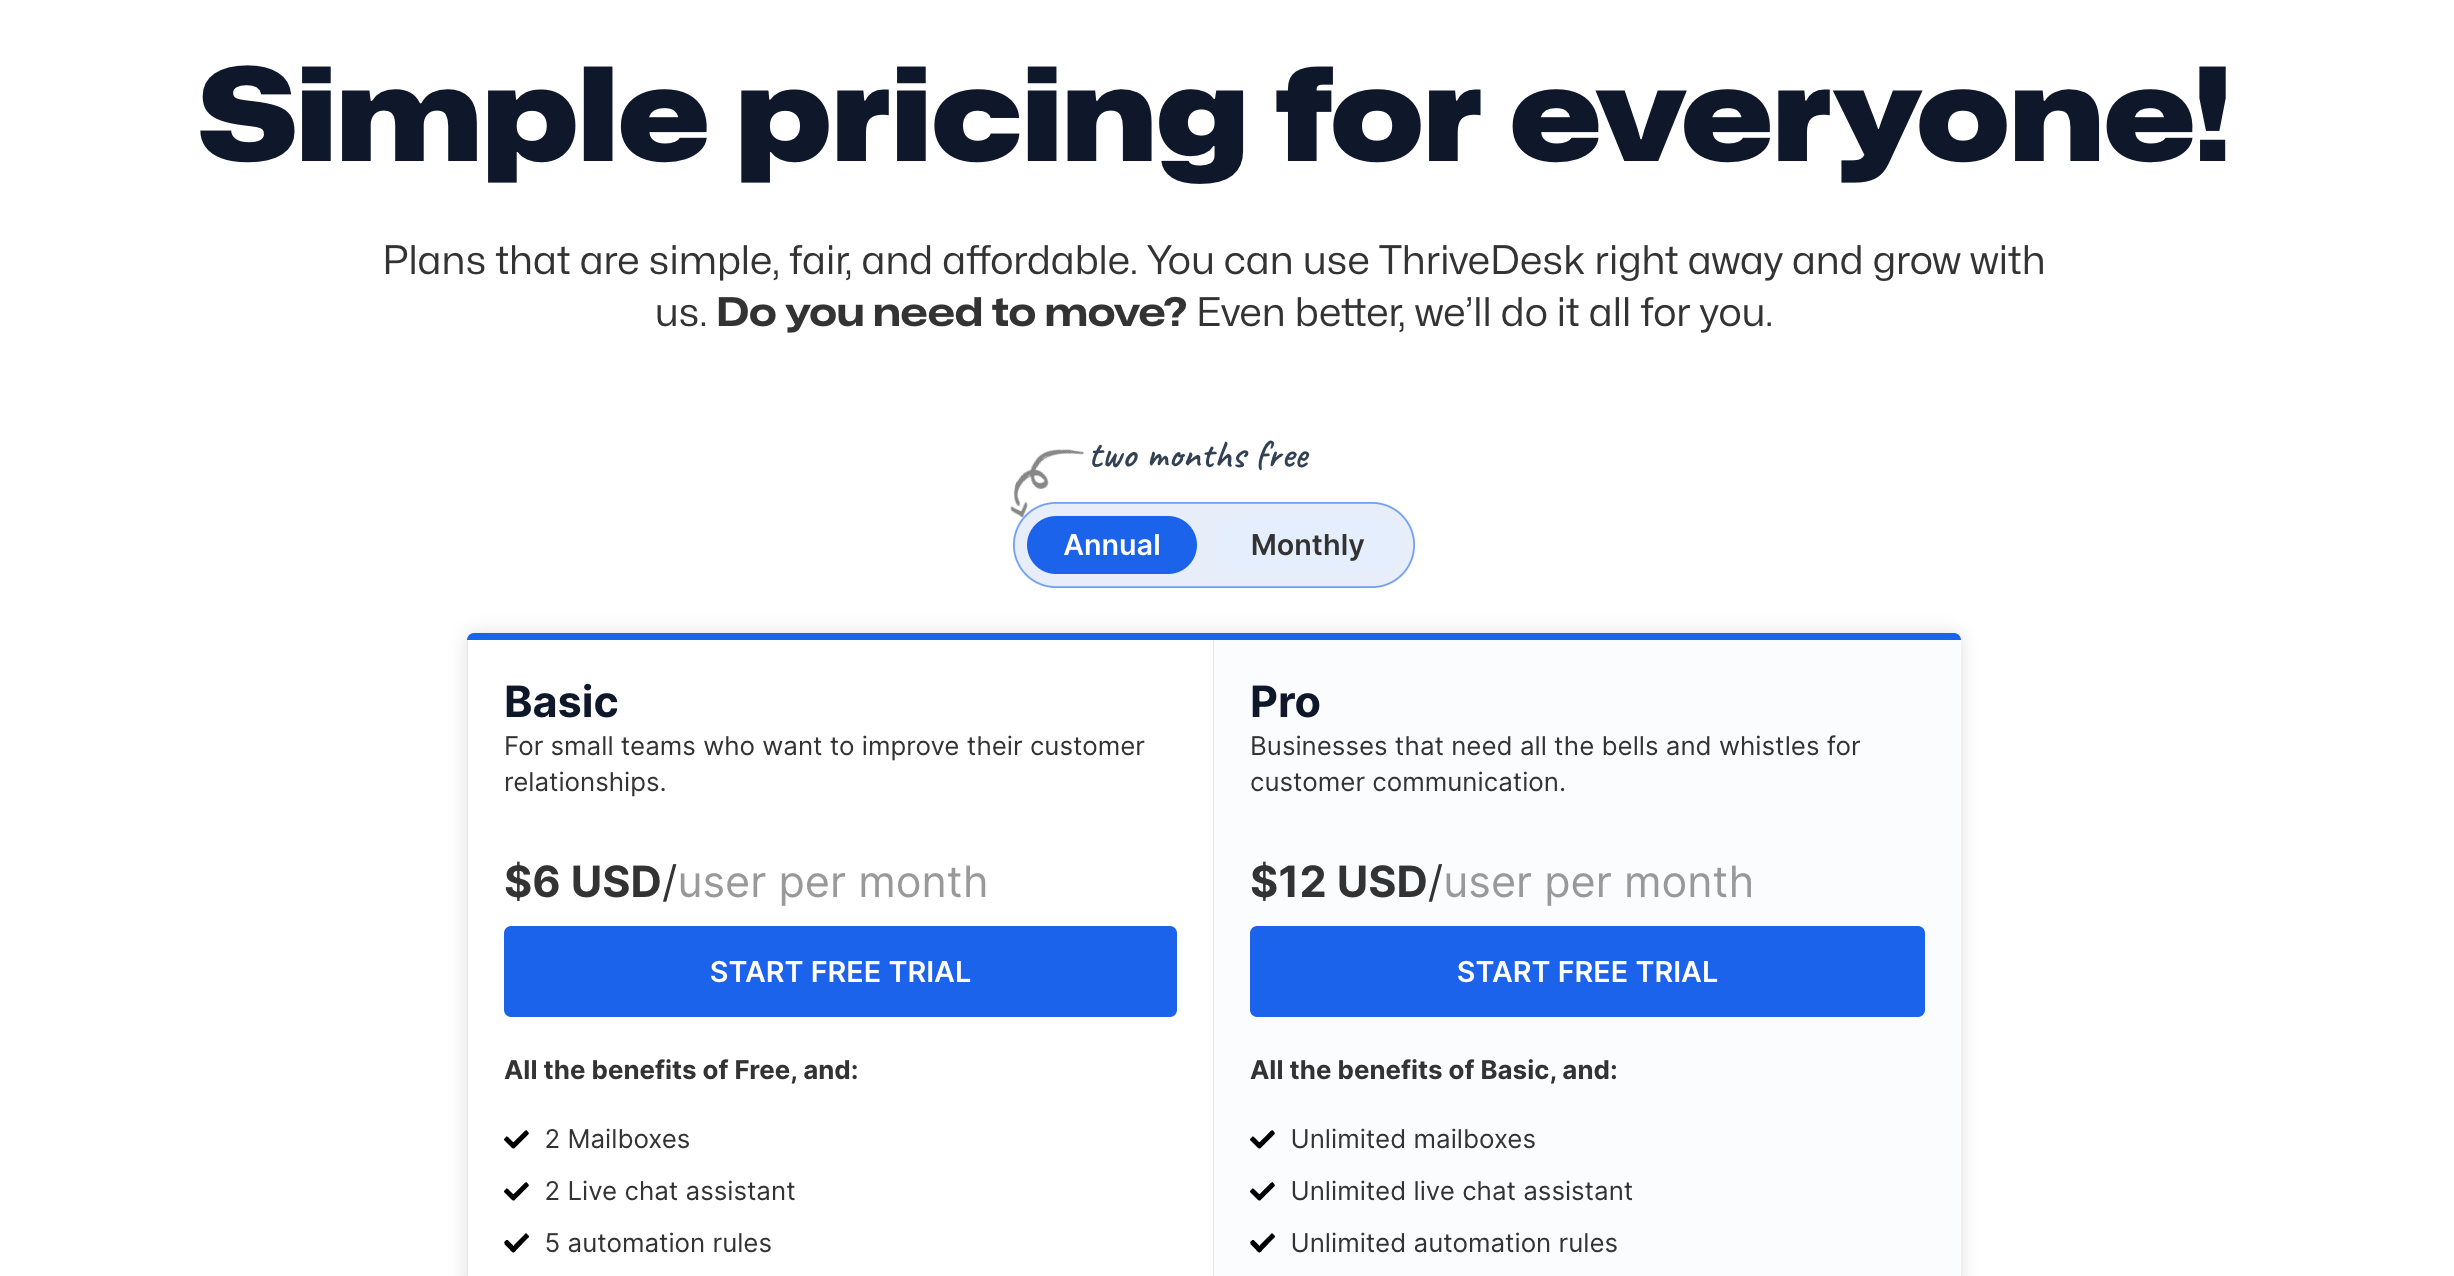 Pricing of ThriveDesk.